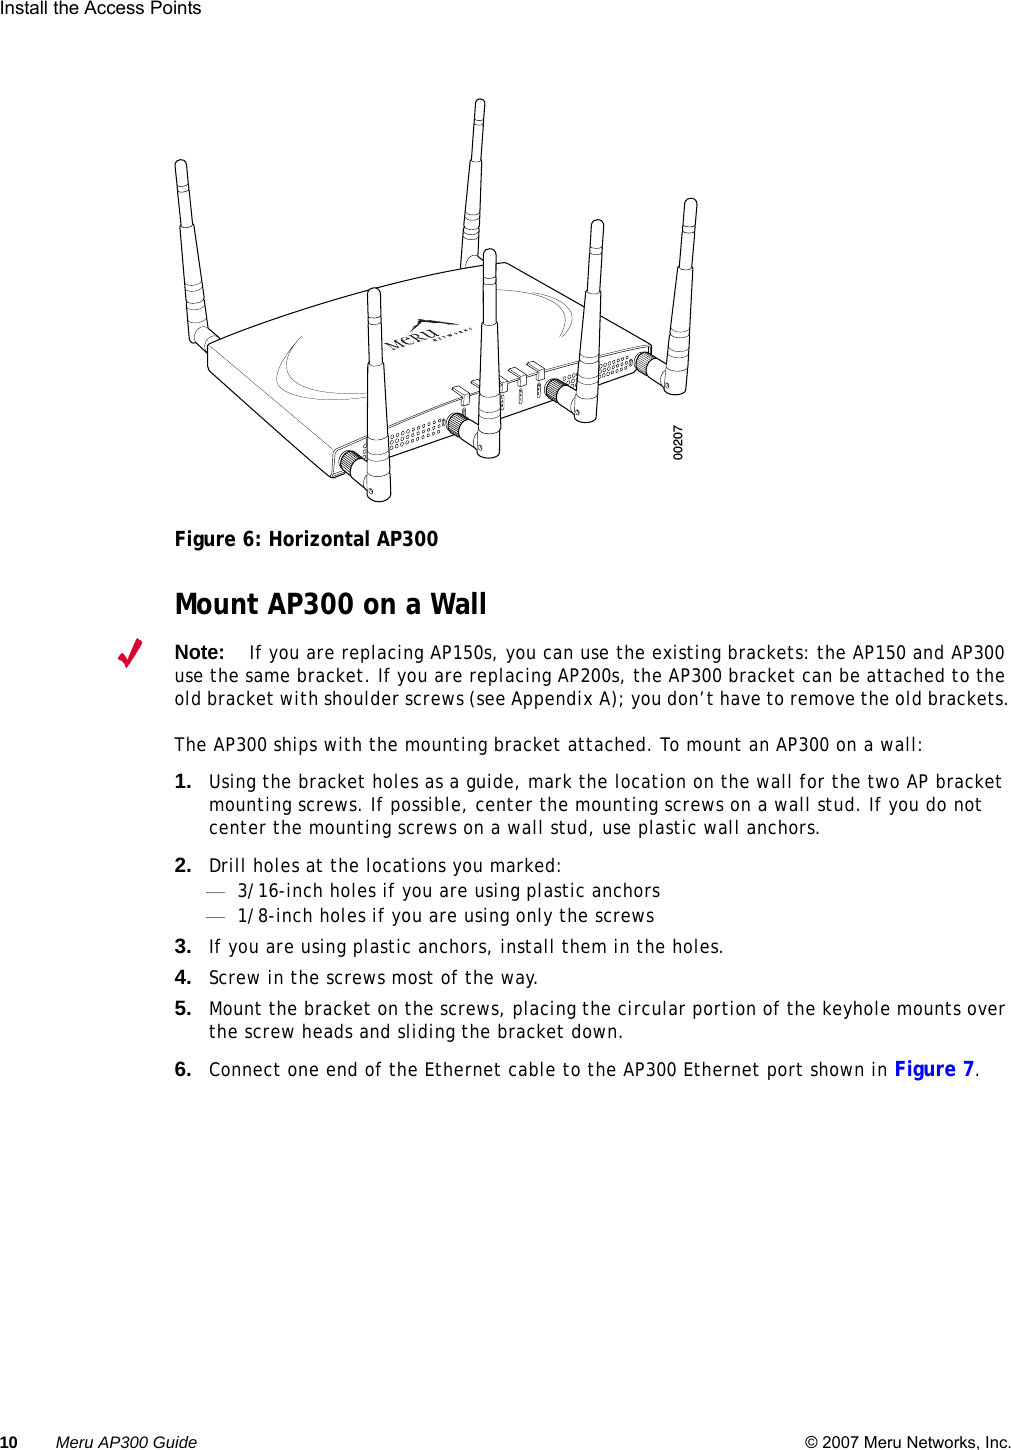 10 Meru AP300 Guide © 2007 Meru Networks, Inc.Install the Access Points Figure 6: Horizontal AP300Mount AP300 on a WallNote:If you are replacing AP150s, you can use the existing brackets: the AP150 and AP300 use the same bracket. If you are replacing AP200s, the AP300 bracket can be attached to the old bracket with shoulder screws (see Appendix A); you don’t have to remove the old brackets.The AP300 ships with the mounting bracket attached. To mount an AP300 on a wall:1. Using the bracket holes as a guide, mark the location on the wall for the two AP bracket mounting screws. If possible, center the mounting screws on a wall stud. If you do not center the mounting screws on a wall stud, use plastic wall anchors.2. Drill holes at the locations you marked:—3/16-inch holes if you are using plastic anchors—1/8-inch holes if you are using only the screws3. If you are using plastic anchors, install them in the holes.4. Screw in the screws most of the way.5. Mount the bracket on the screws, placing the circular portion of the keyhole mounts over the screw heads and sliding the bracket down.6. Connect one end of the Ethernet cable to the AP300 Ethernet port shown in Figure 7.A2A2ALANRF1RF2200207